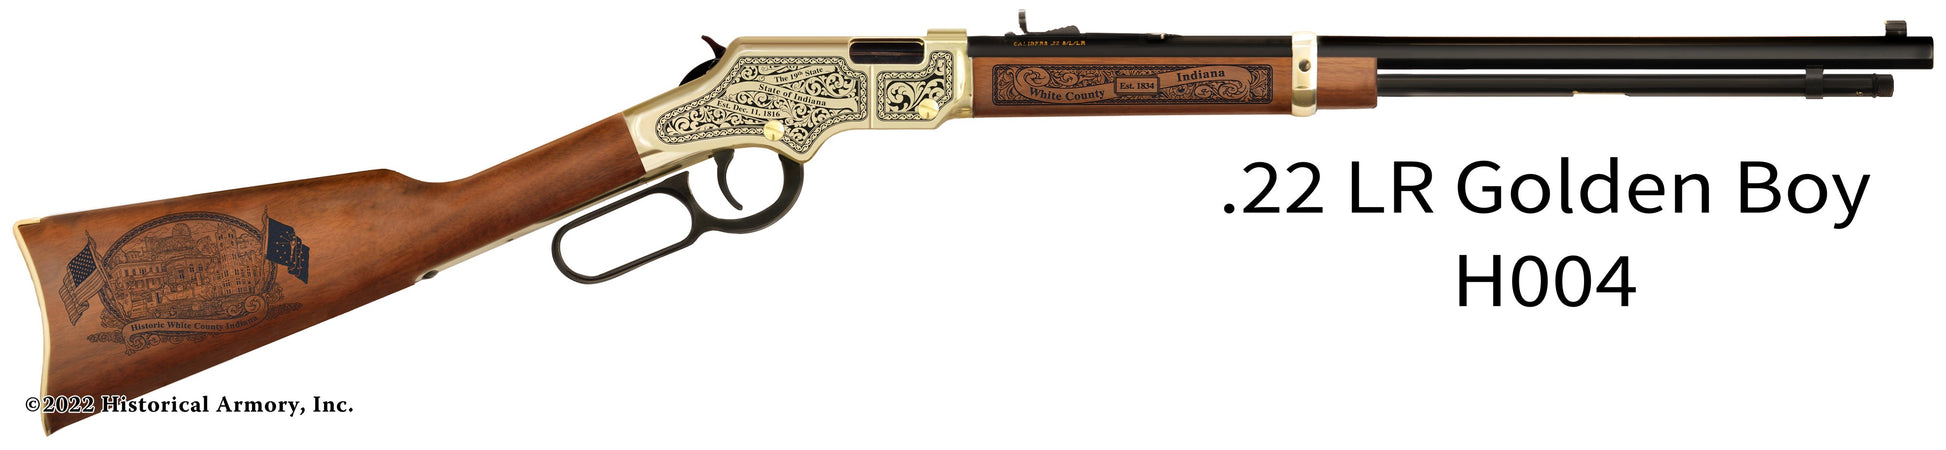 White County Indiana Engraved Henry Golden Boy Rifle